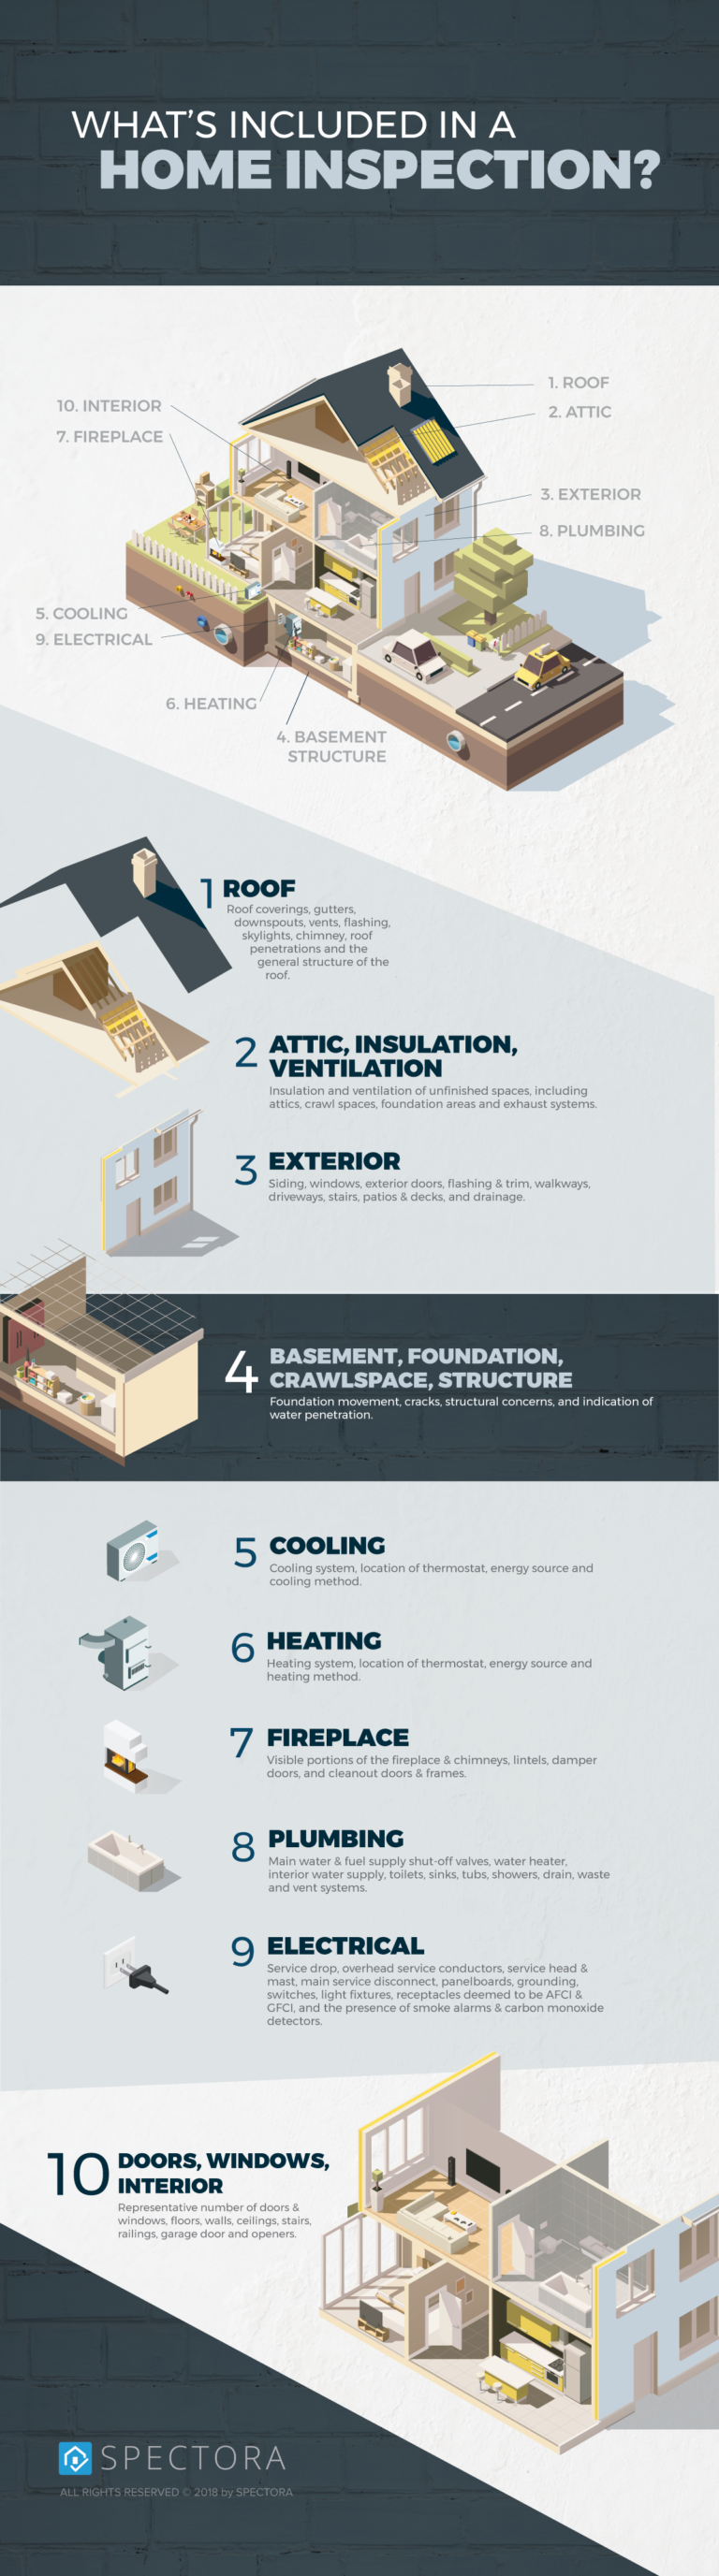 What's included in a home inspection?